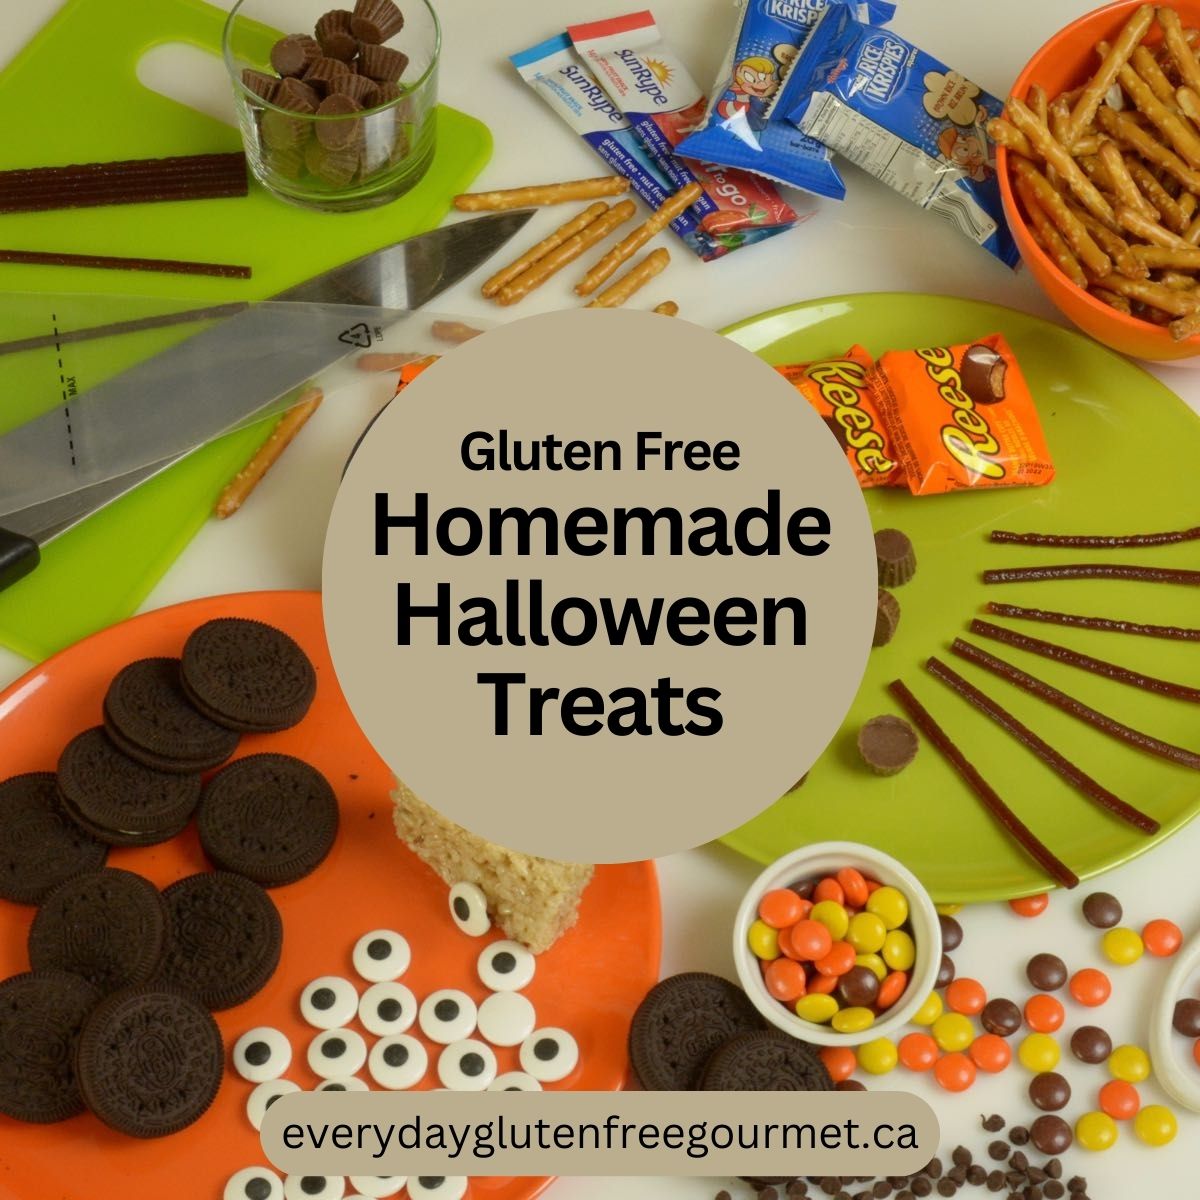 Green and orange plates with Oreo cookies, pretzels, googly eyes and m&m's to make homemade Halloween treats.